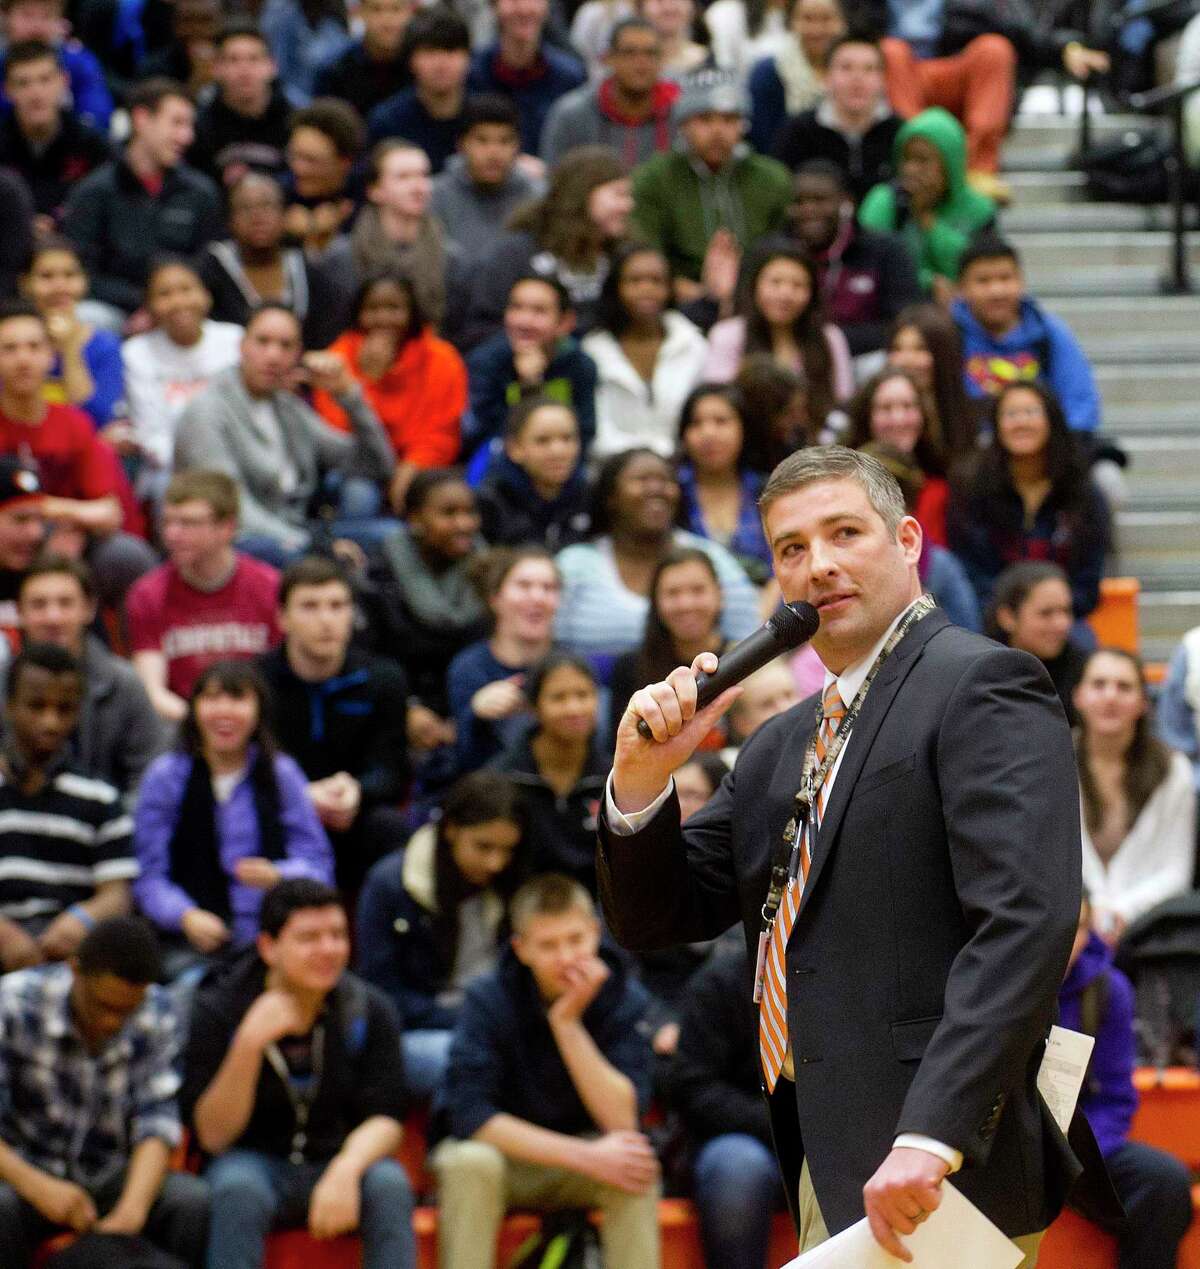 Then-assistant principal Matthew Forker speaks during an assembly aimed to increase school pride on Friday, February 20, 2015.